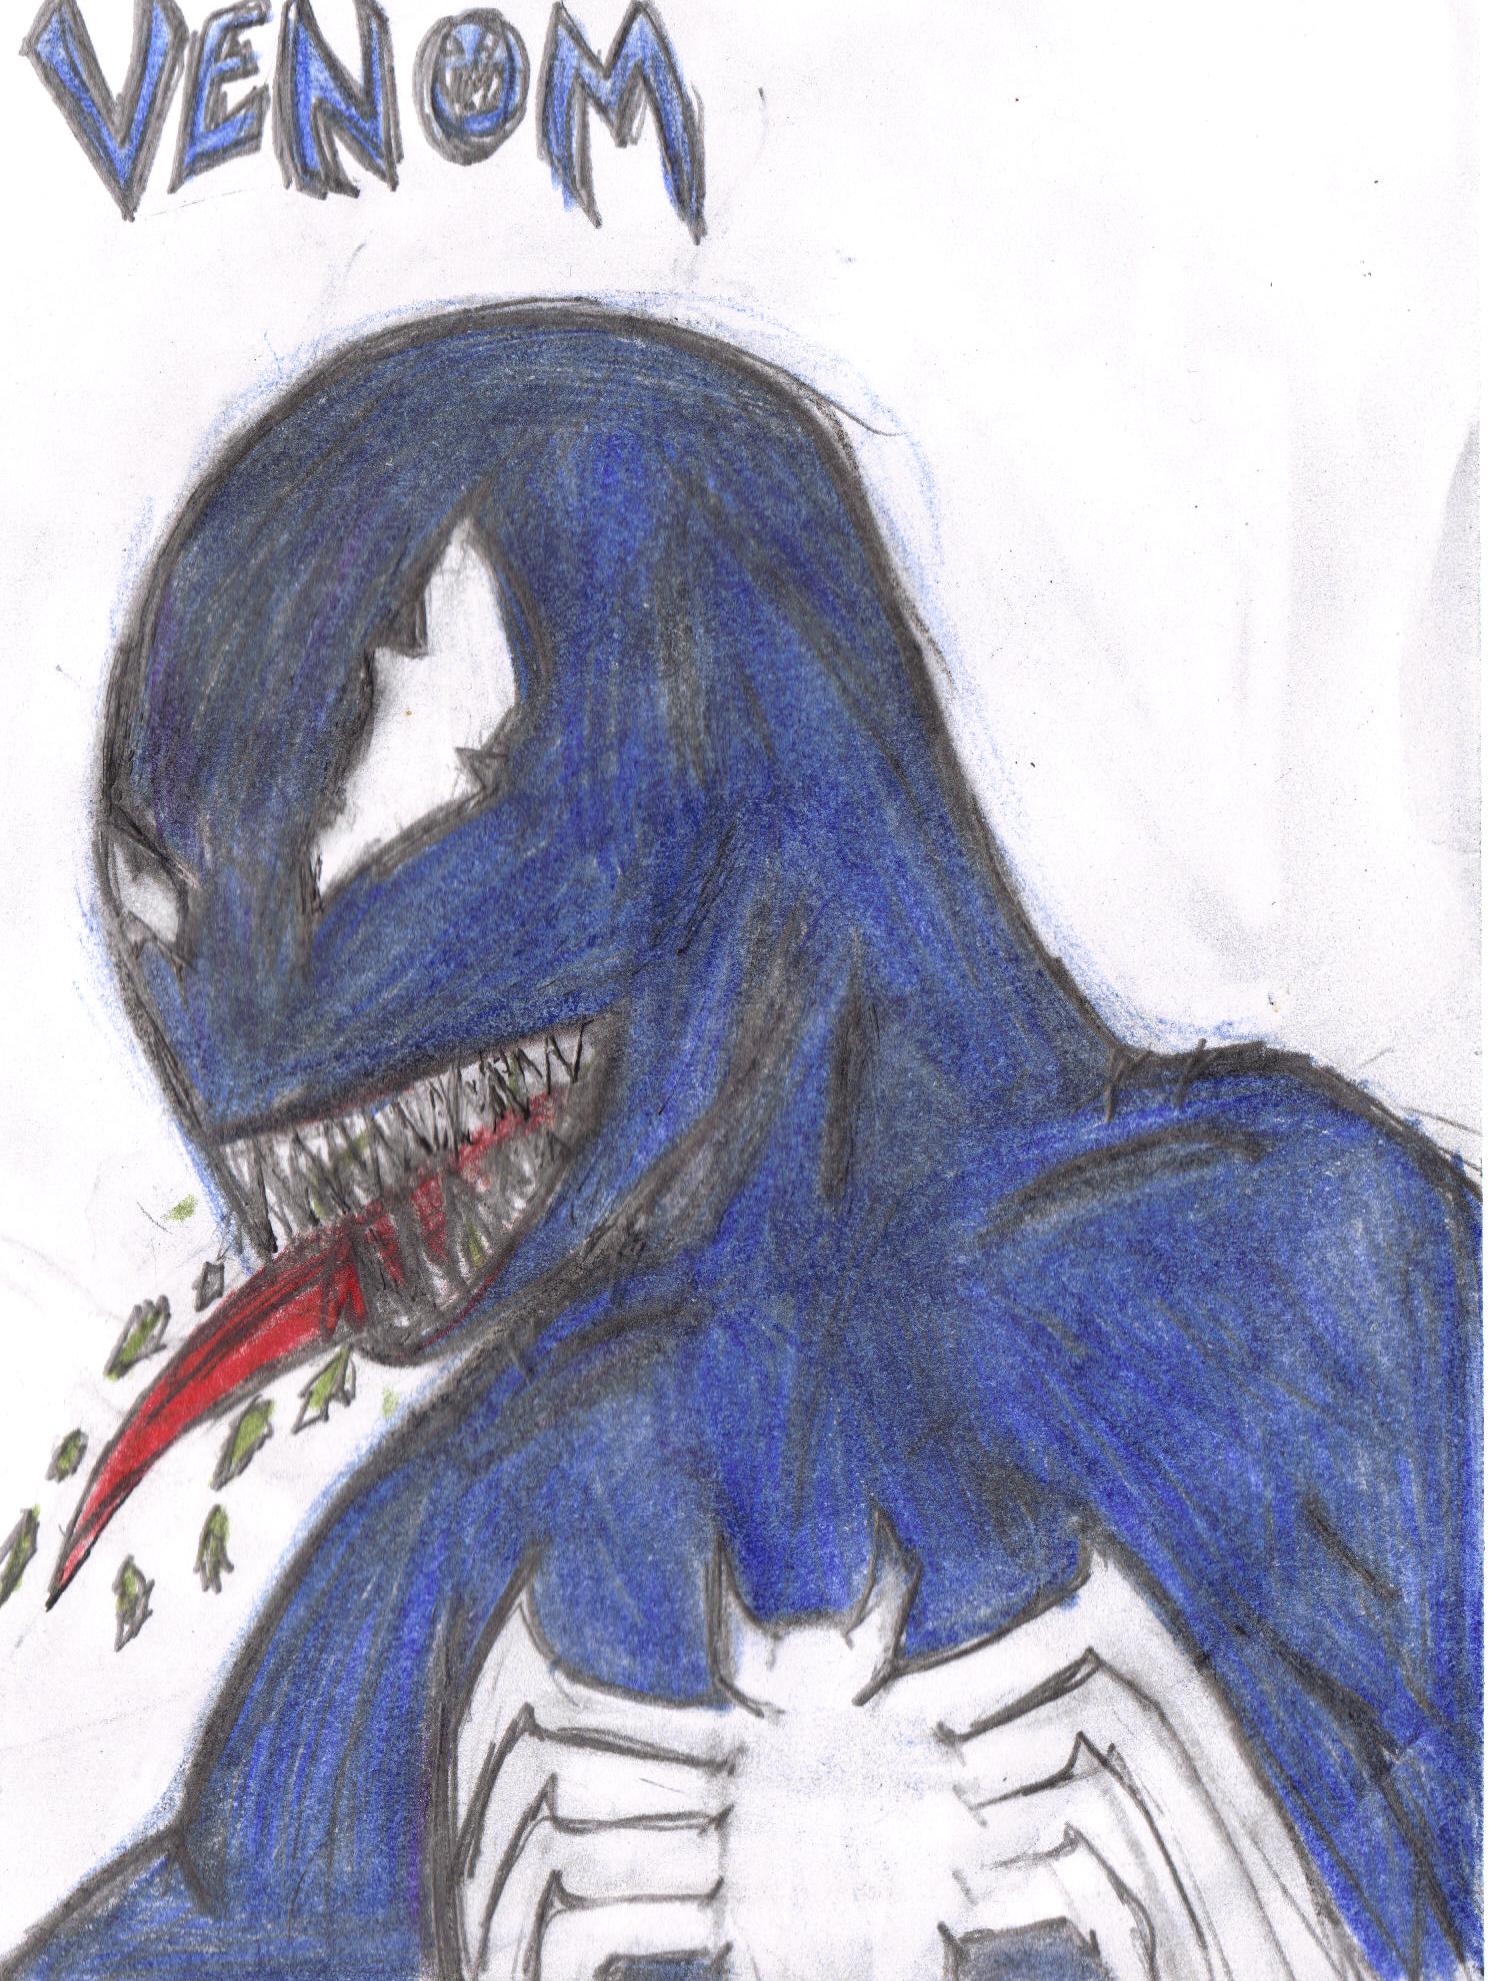 WE ARE VENOM! by Adventfear